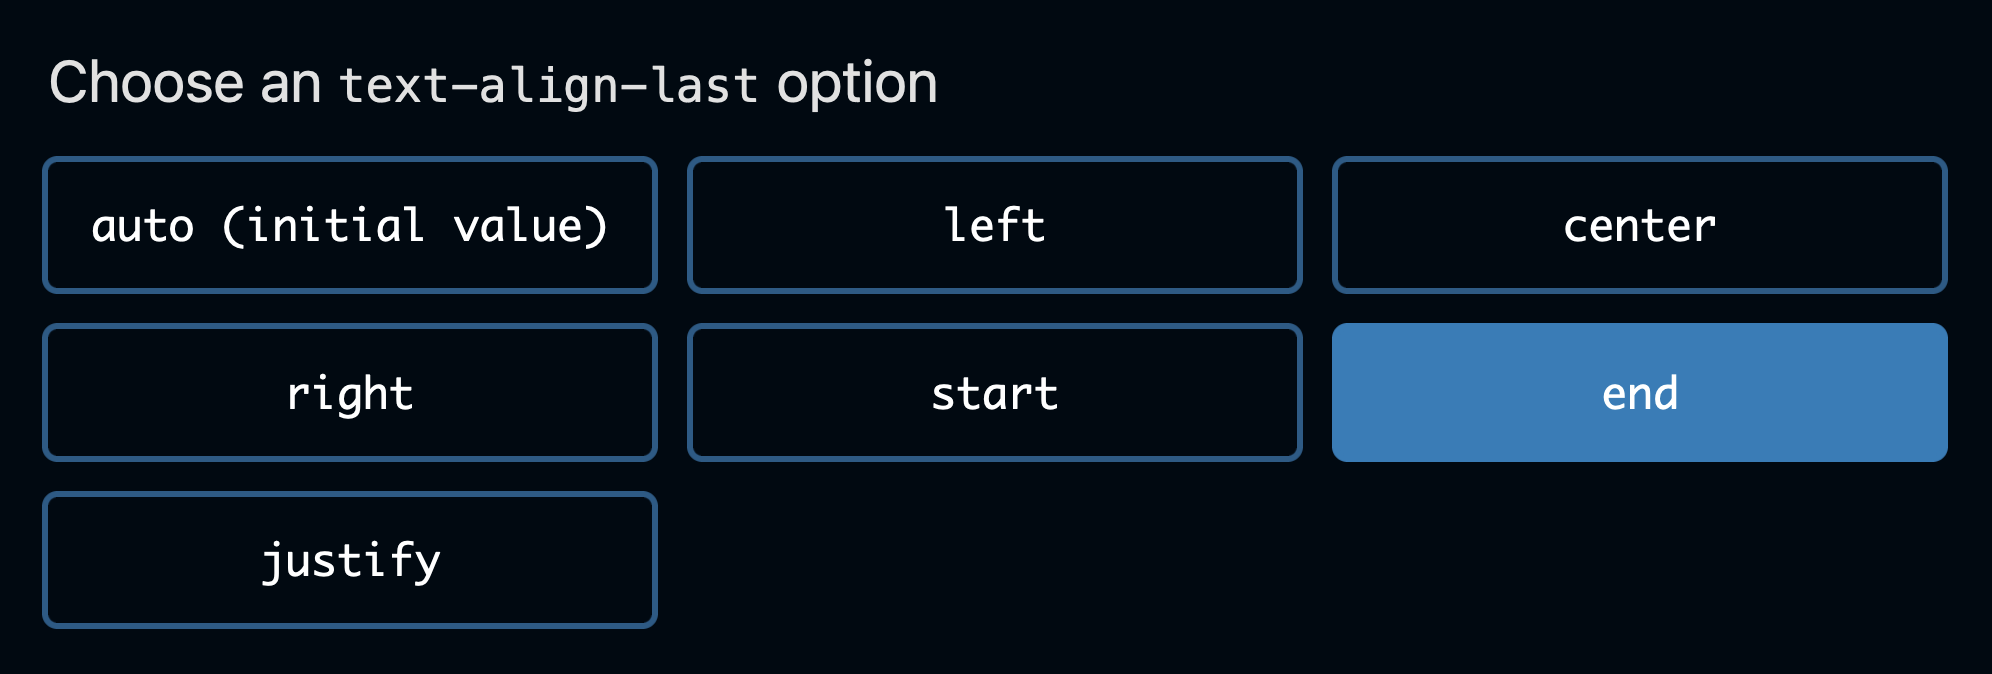 Interface: Choose a text-align-last option with the options: auto, left, center, right, start, end and justify.